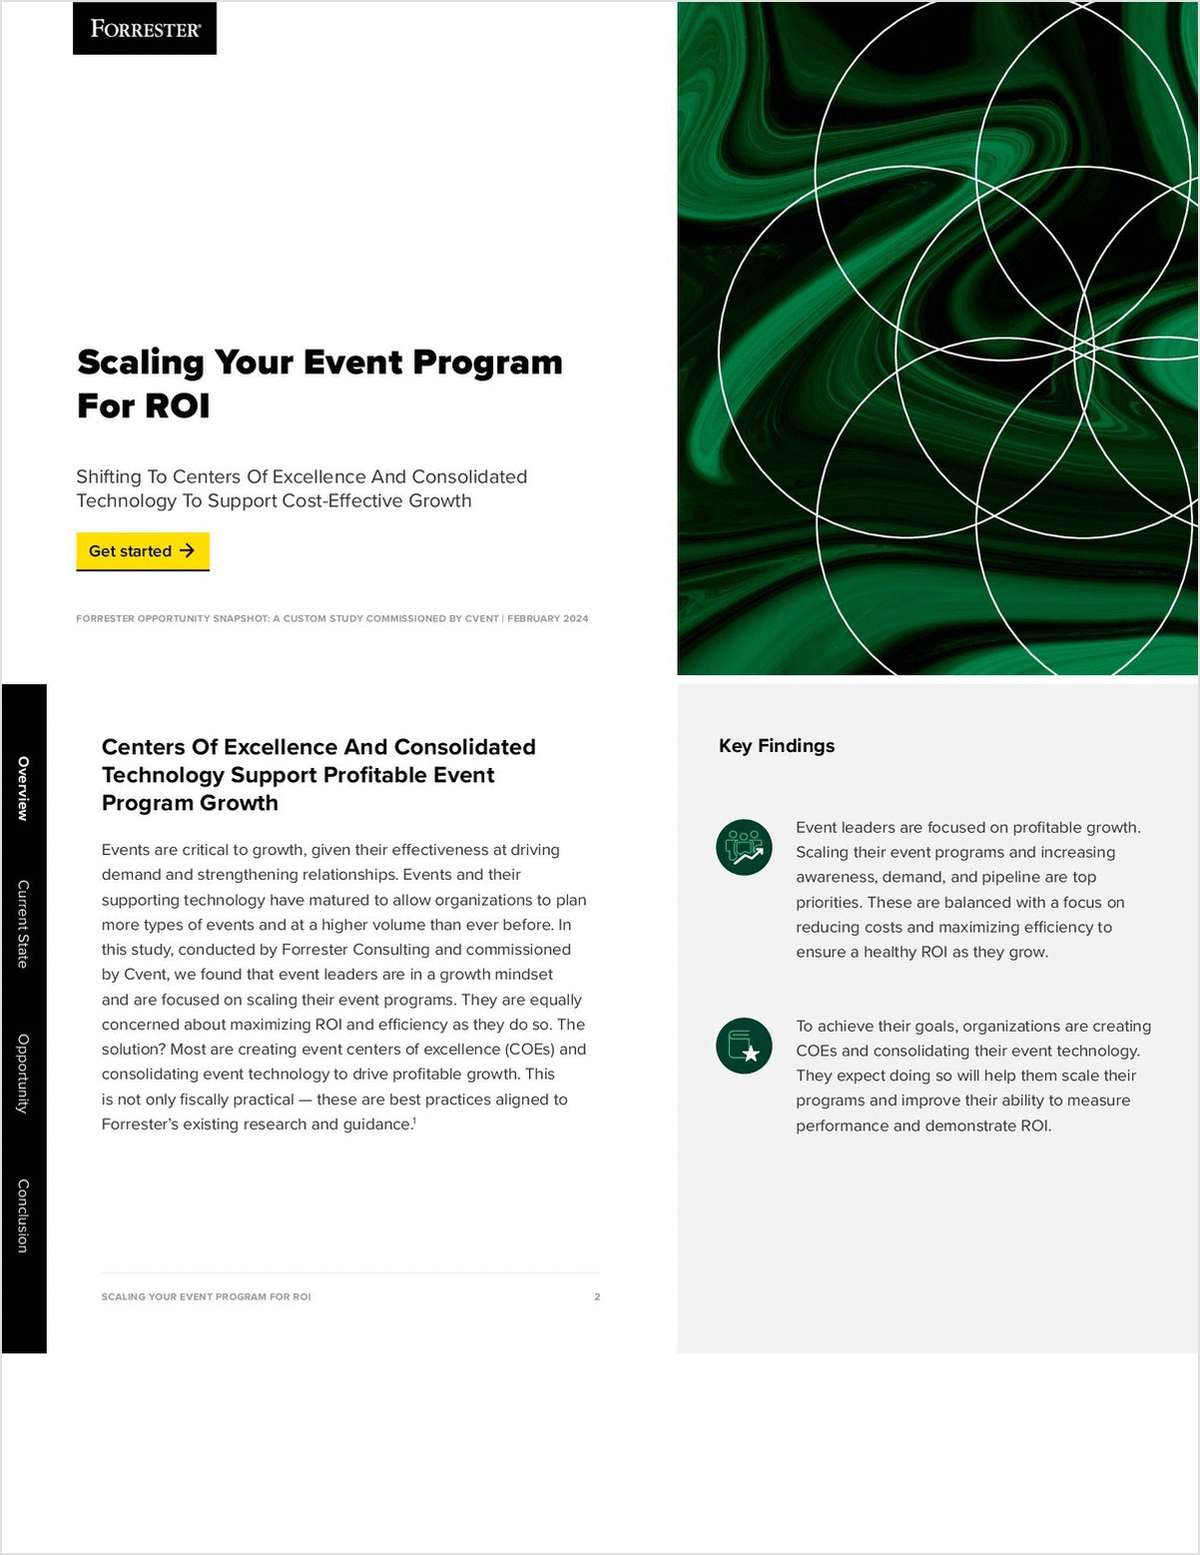 Scaling Your Event Program for ROI